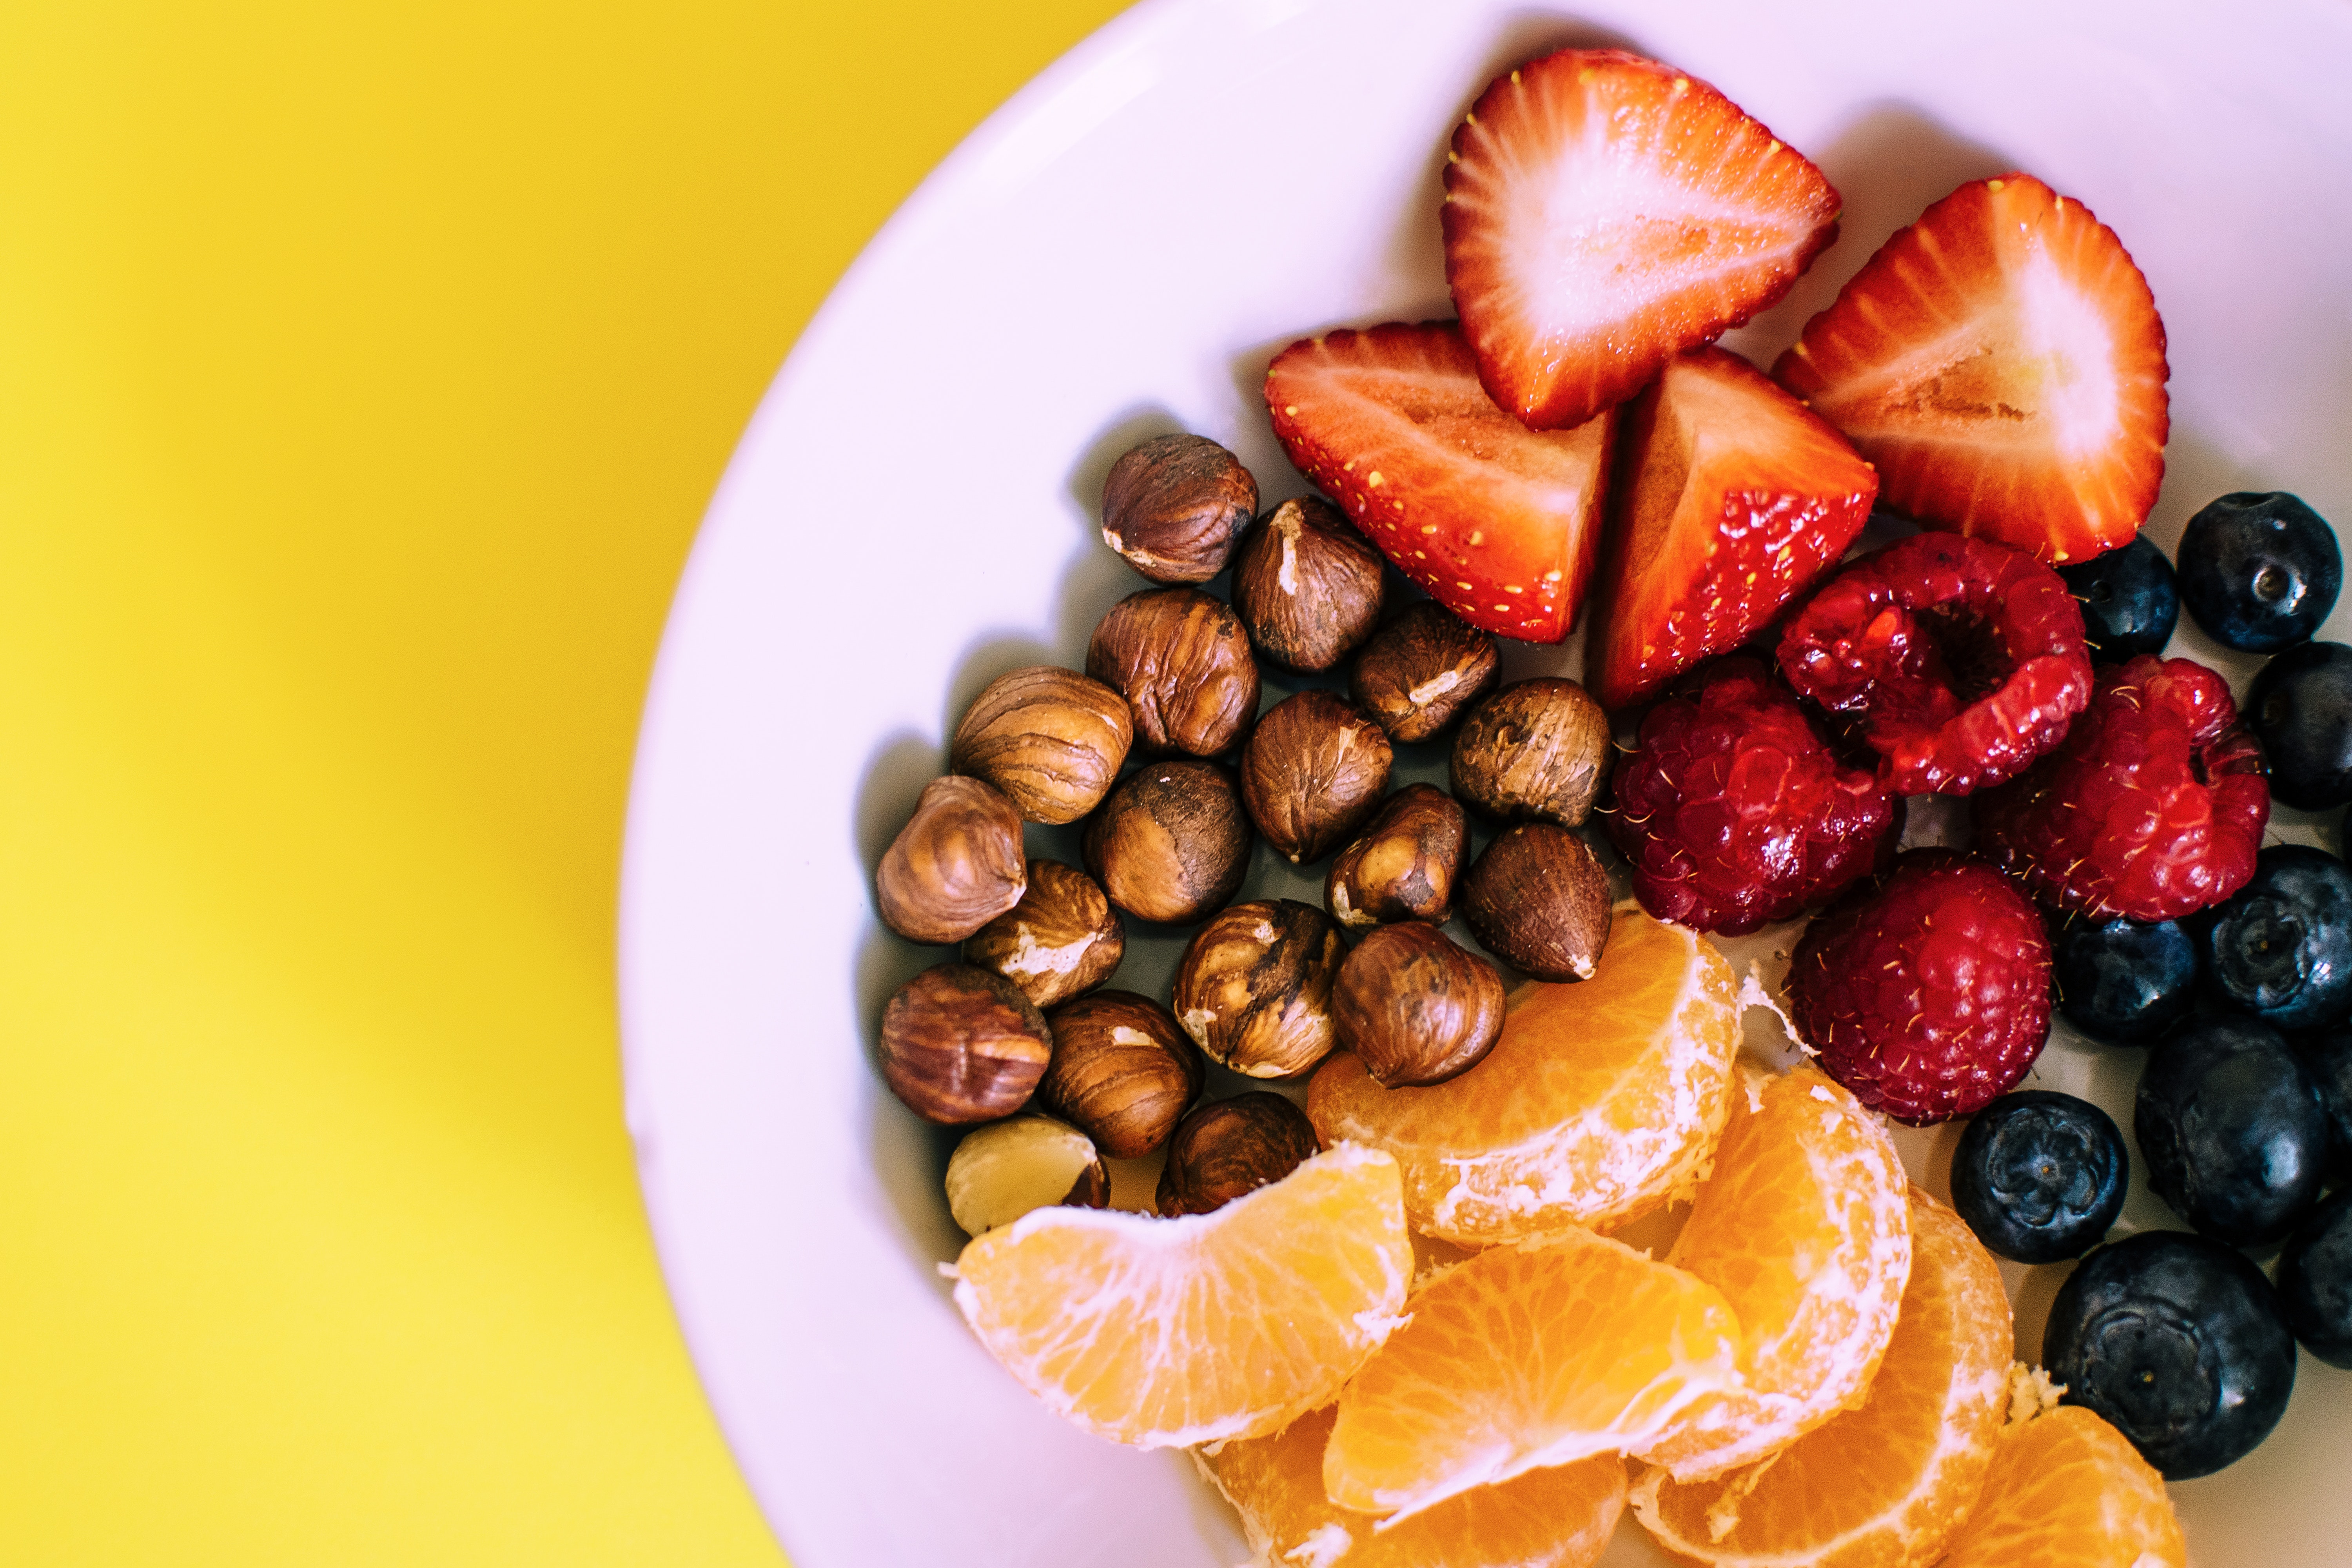 Plate with chestnuts, blueberries and  slices of oranges and strawberries.